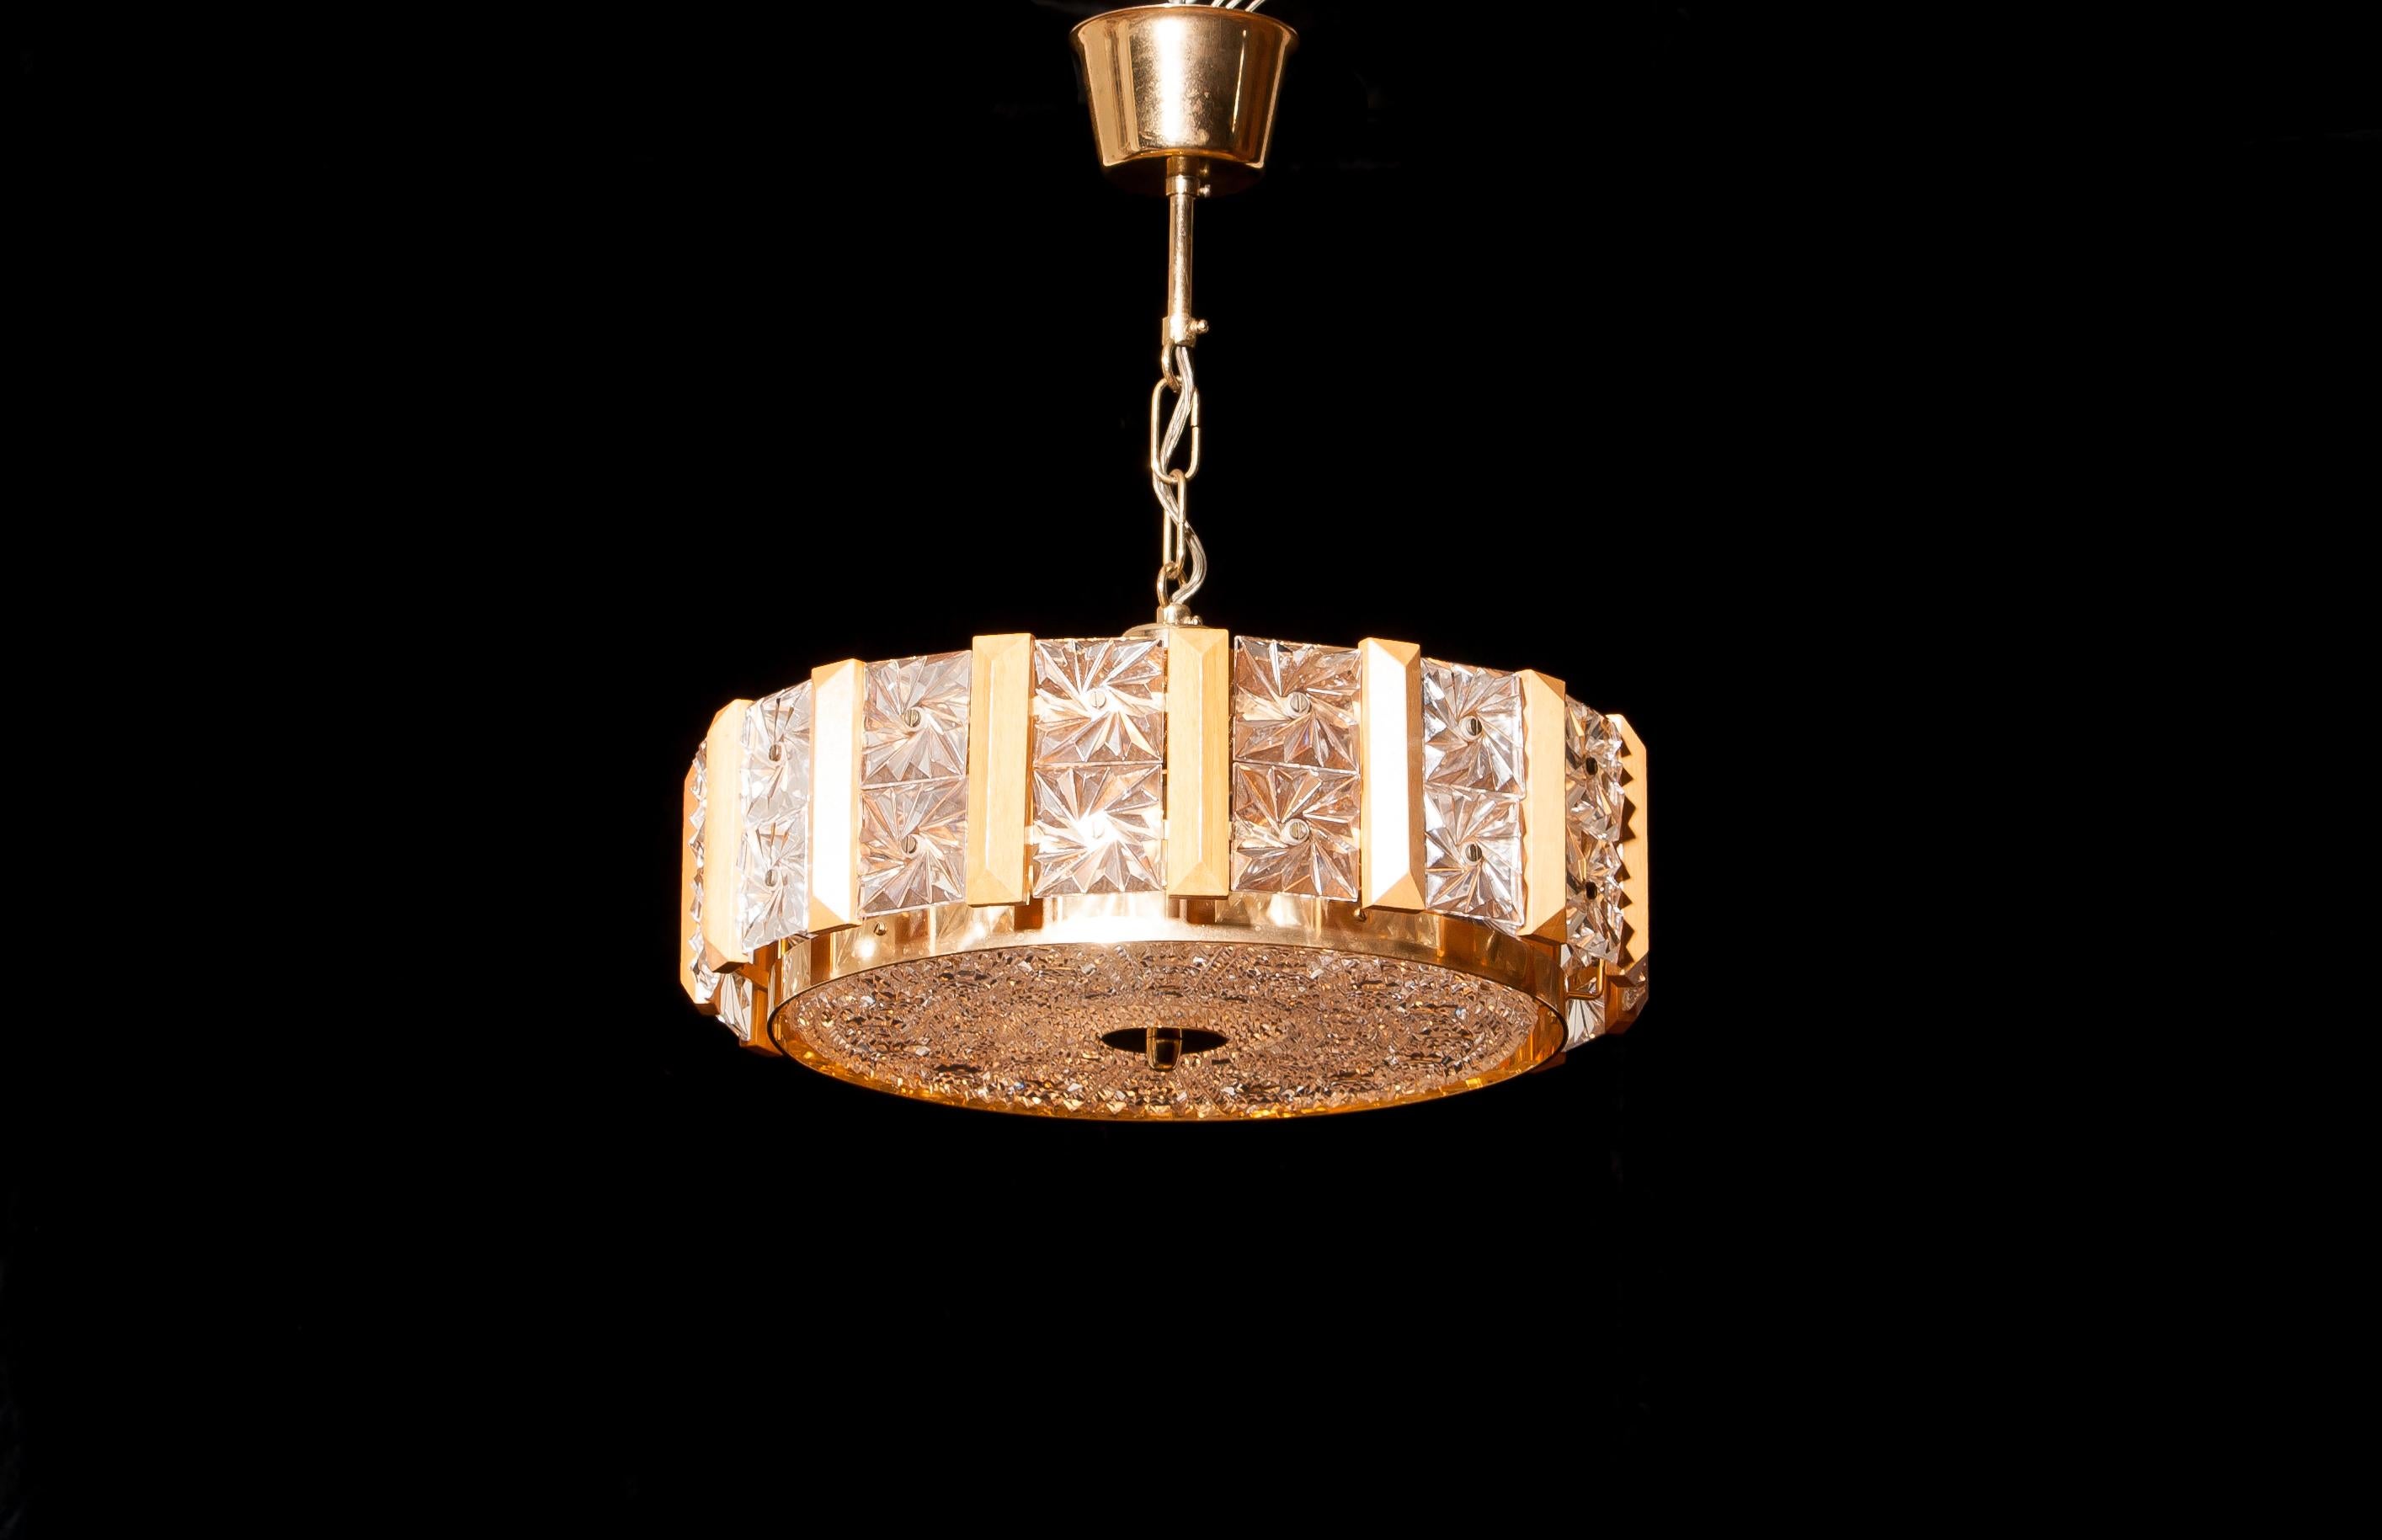 Beautiful pendant designed by Carl Fagerlund for Orrefors, Sweden.
This lamp is made of crystal glass with brass elements and teak.
The crystal glass gives a wonderful shining.
Period 1960s
Dimensions: H 12 cm, ø 38 cm.